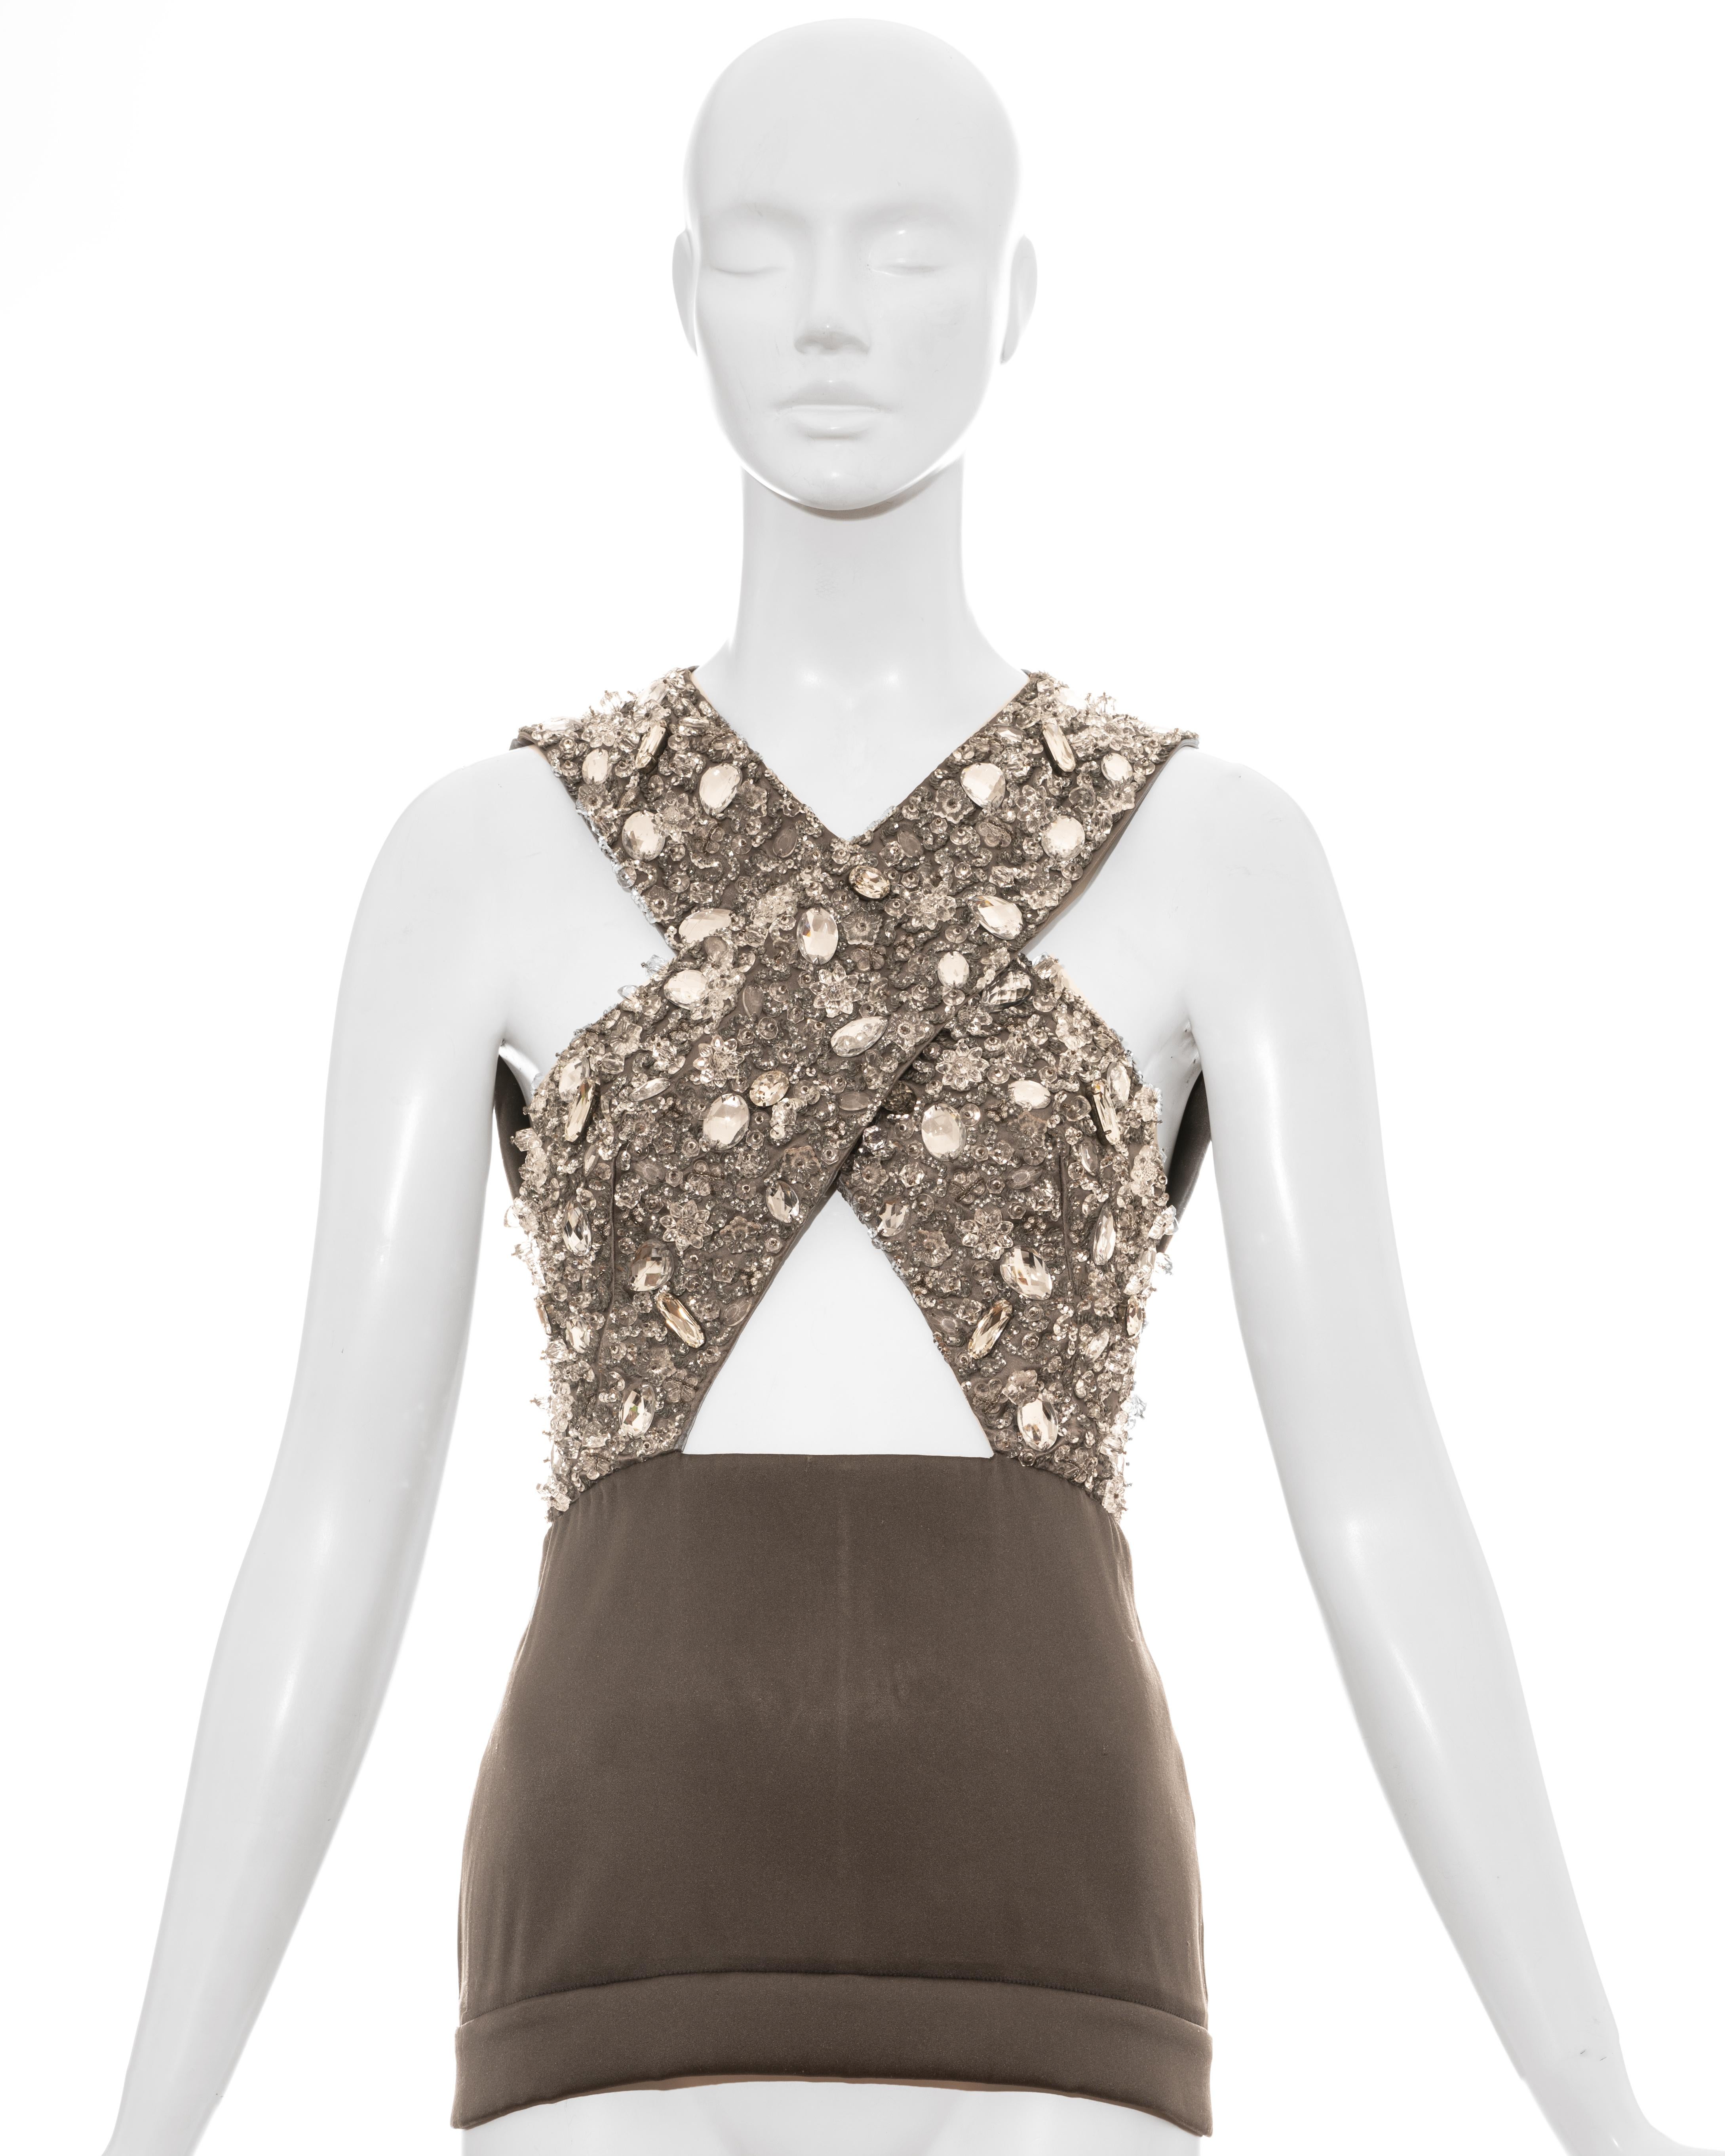 Prada grey crystal embellished evening vest with cut-out cleavage and back zip fastening. 

Spring-Summer 2010